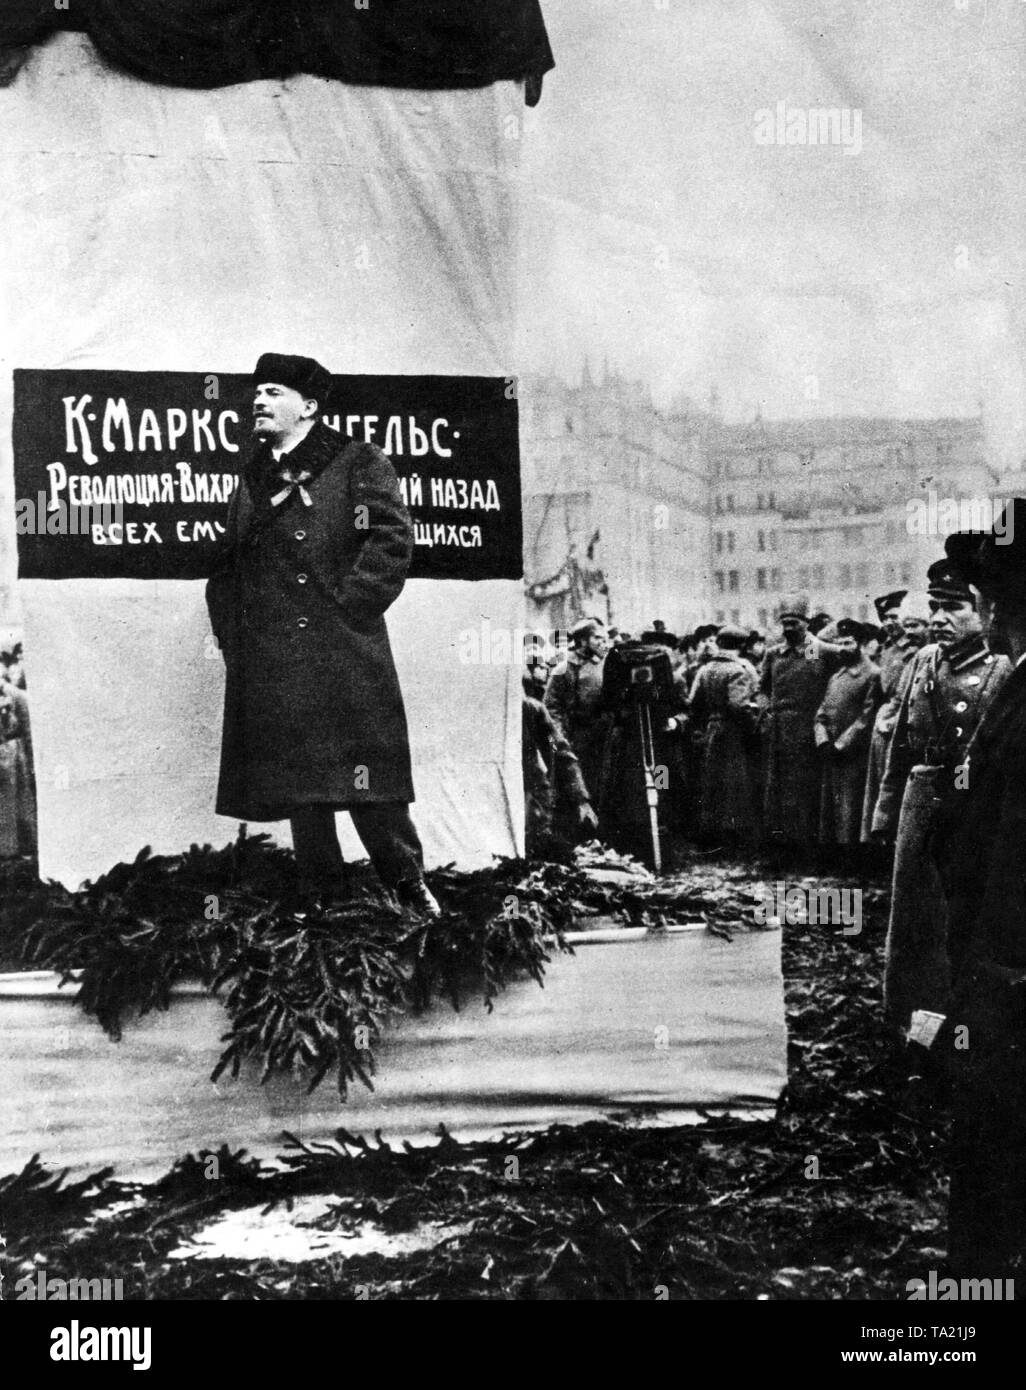 Vladimir Ilyich Lenin delivers a speech at the unveiling of the Marx-Engels monument in Moscow. Stock Photo